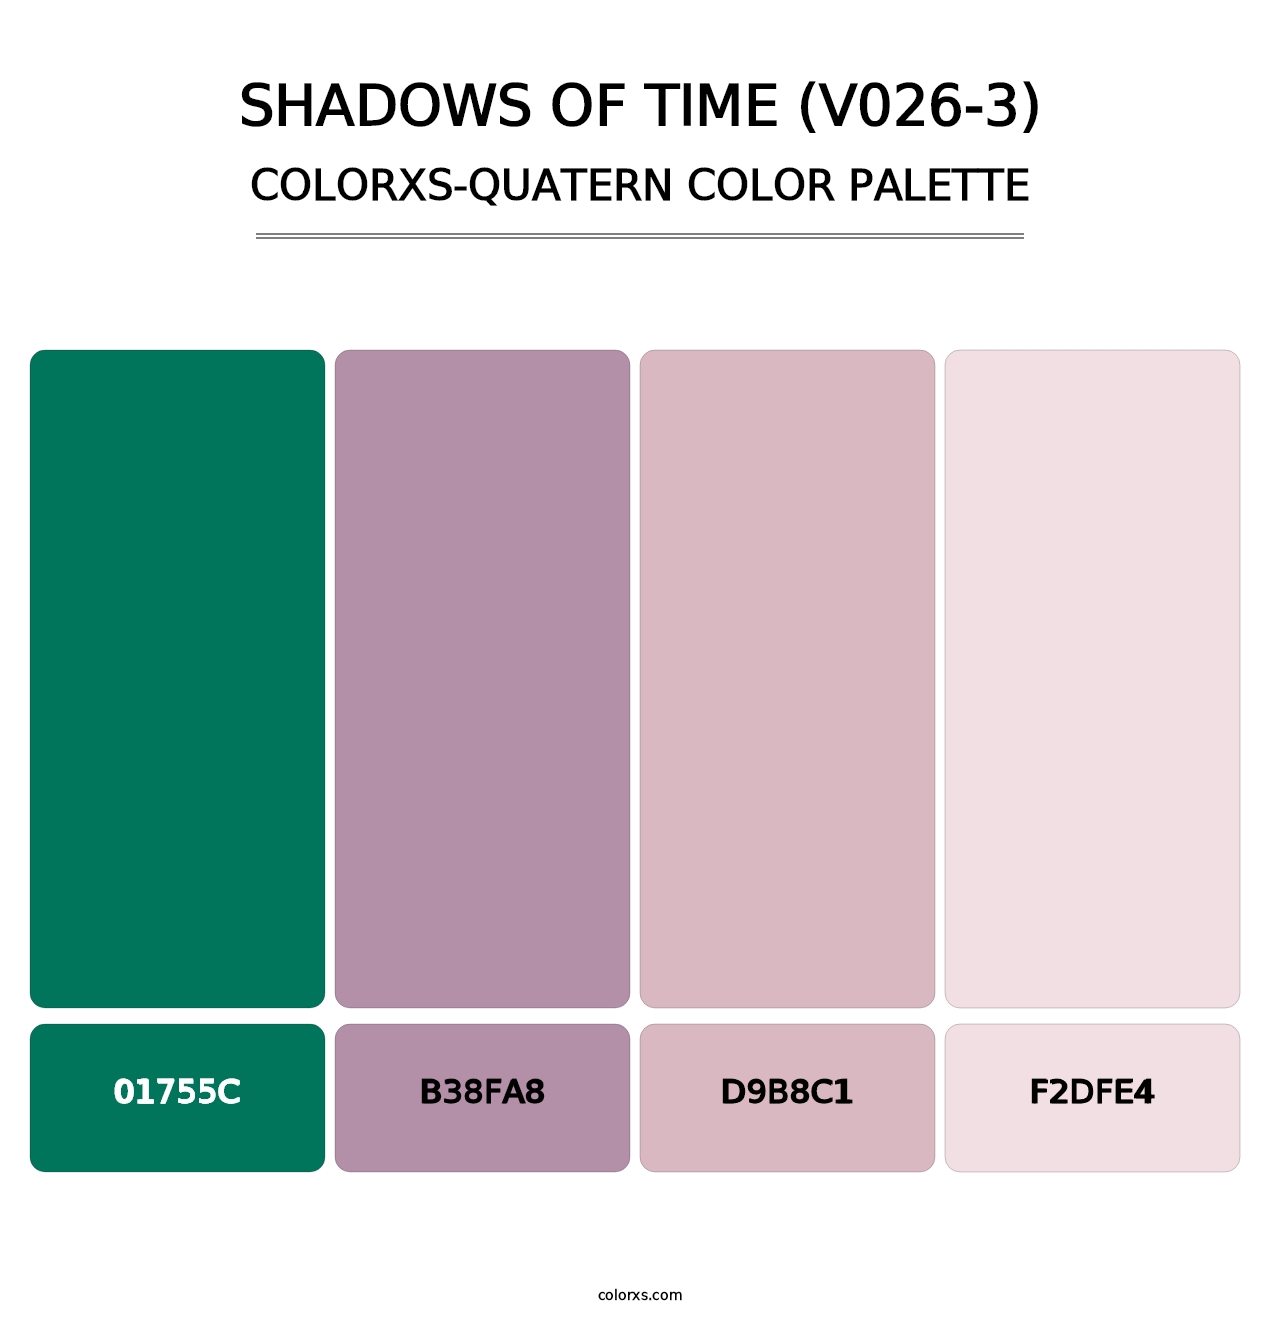 Shadows of Time (V026-3) - Colorxs Quatern Palette